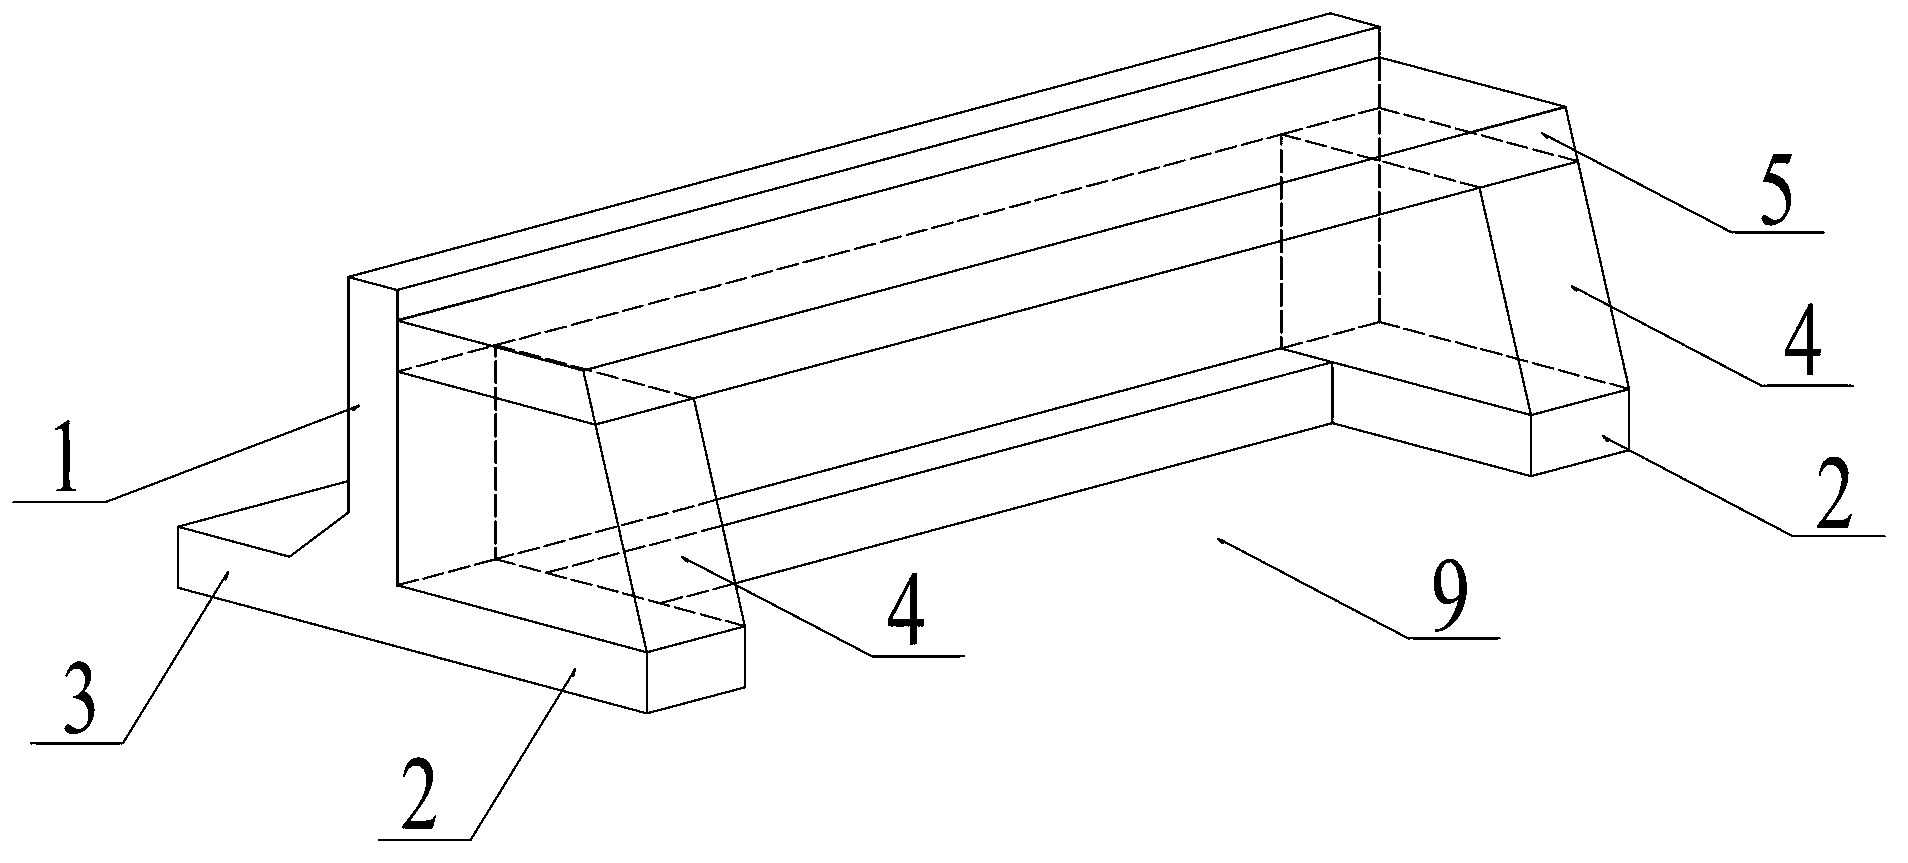 L-shaped retaining wall structure with cross-over type special-shaped counterfort